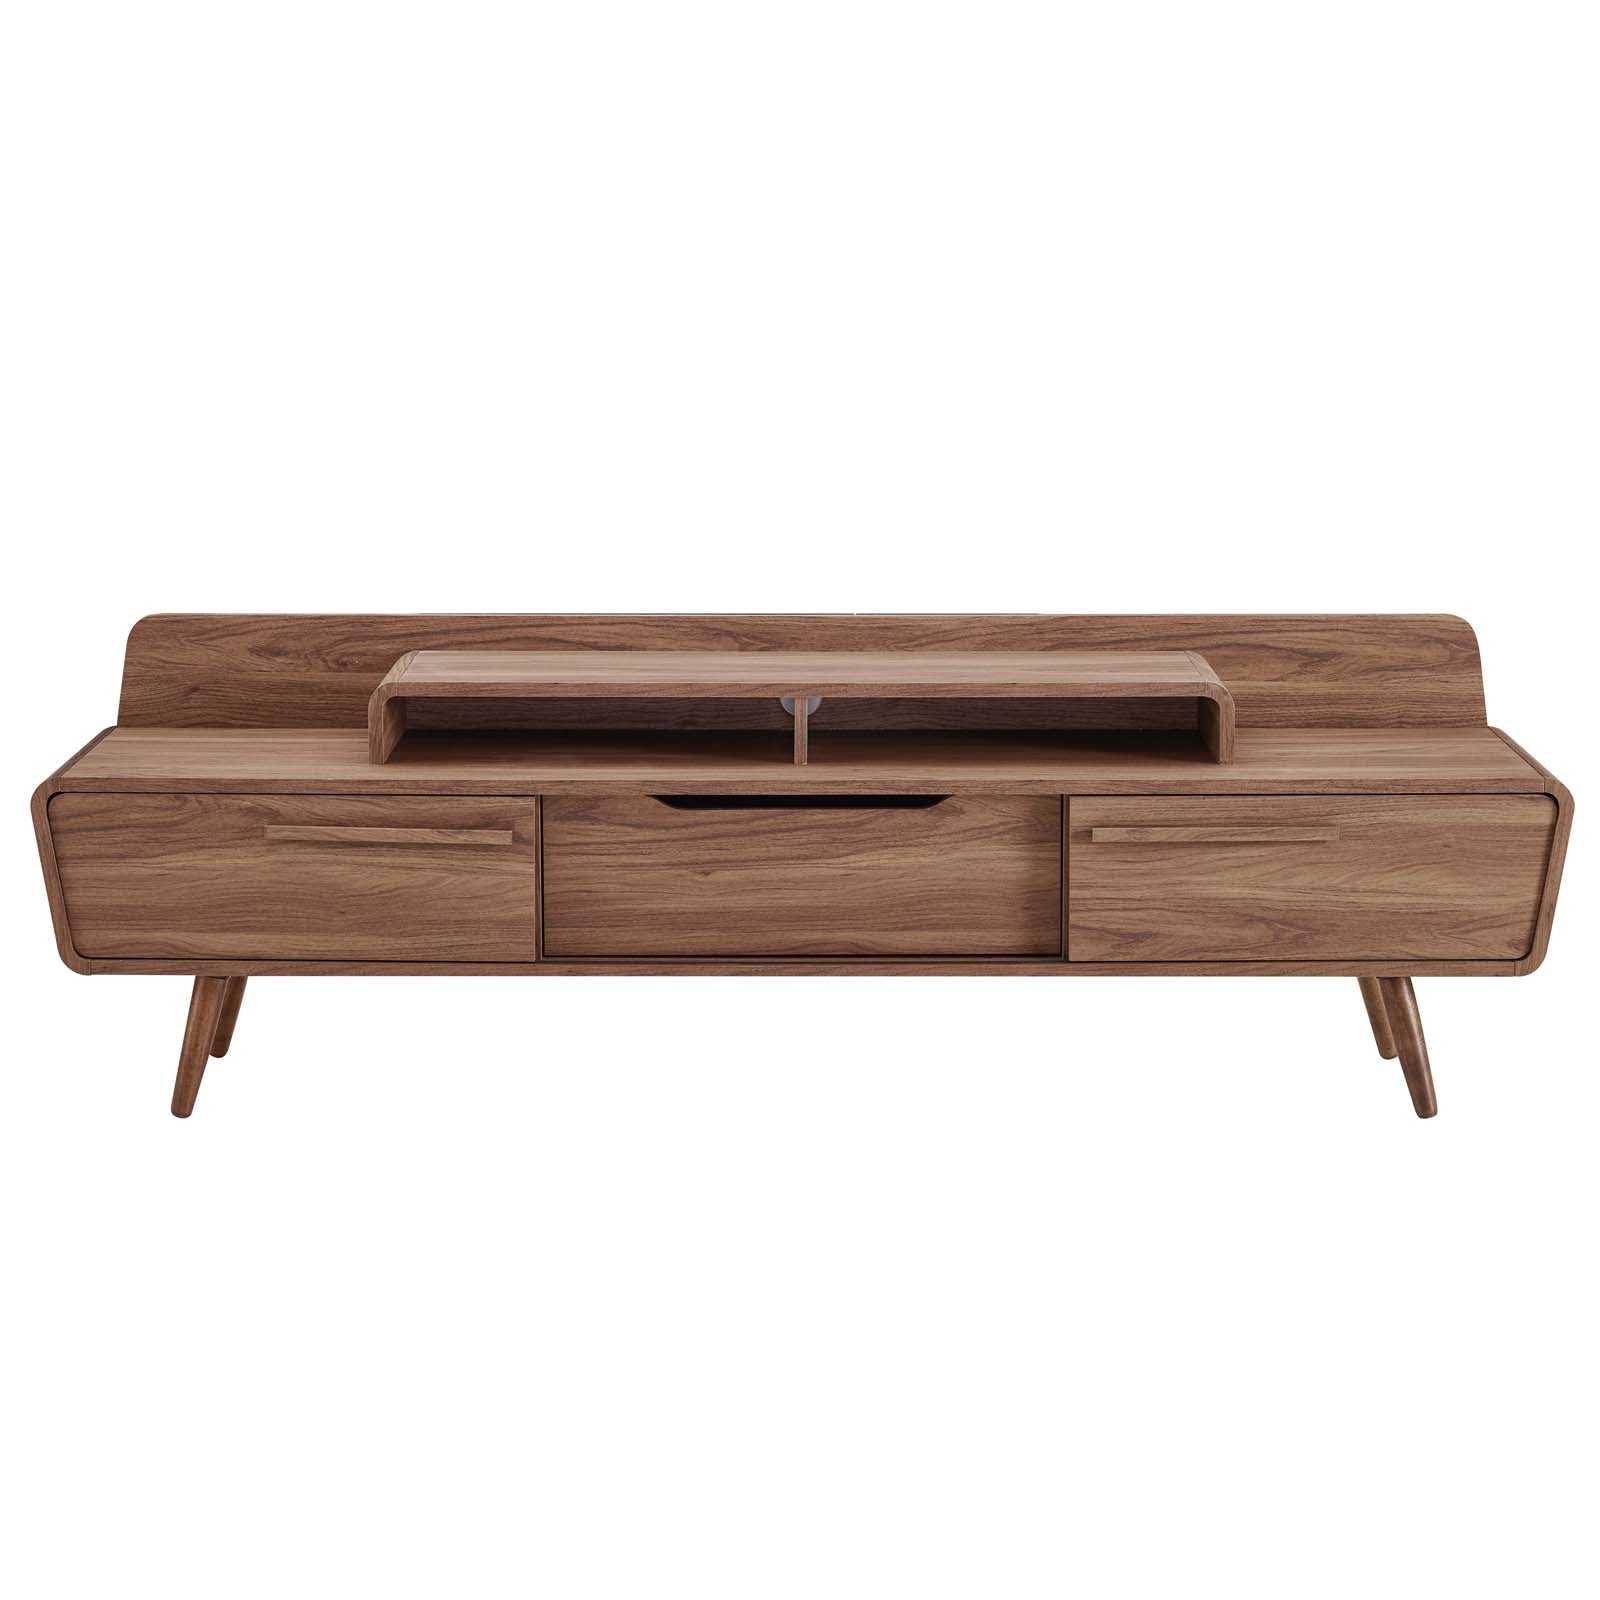 Omnistand 2 Piece Entertainment Center - East Shore Modern Home Furnishings